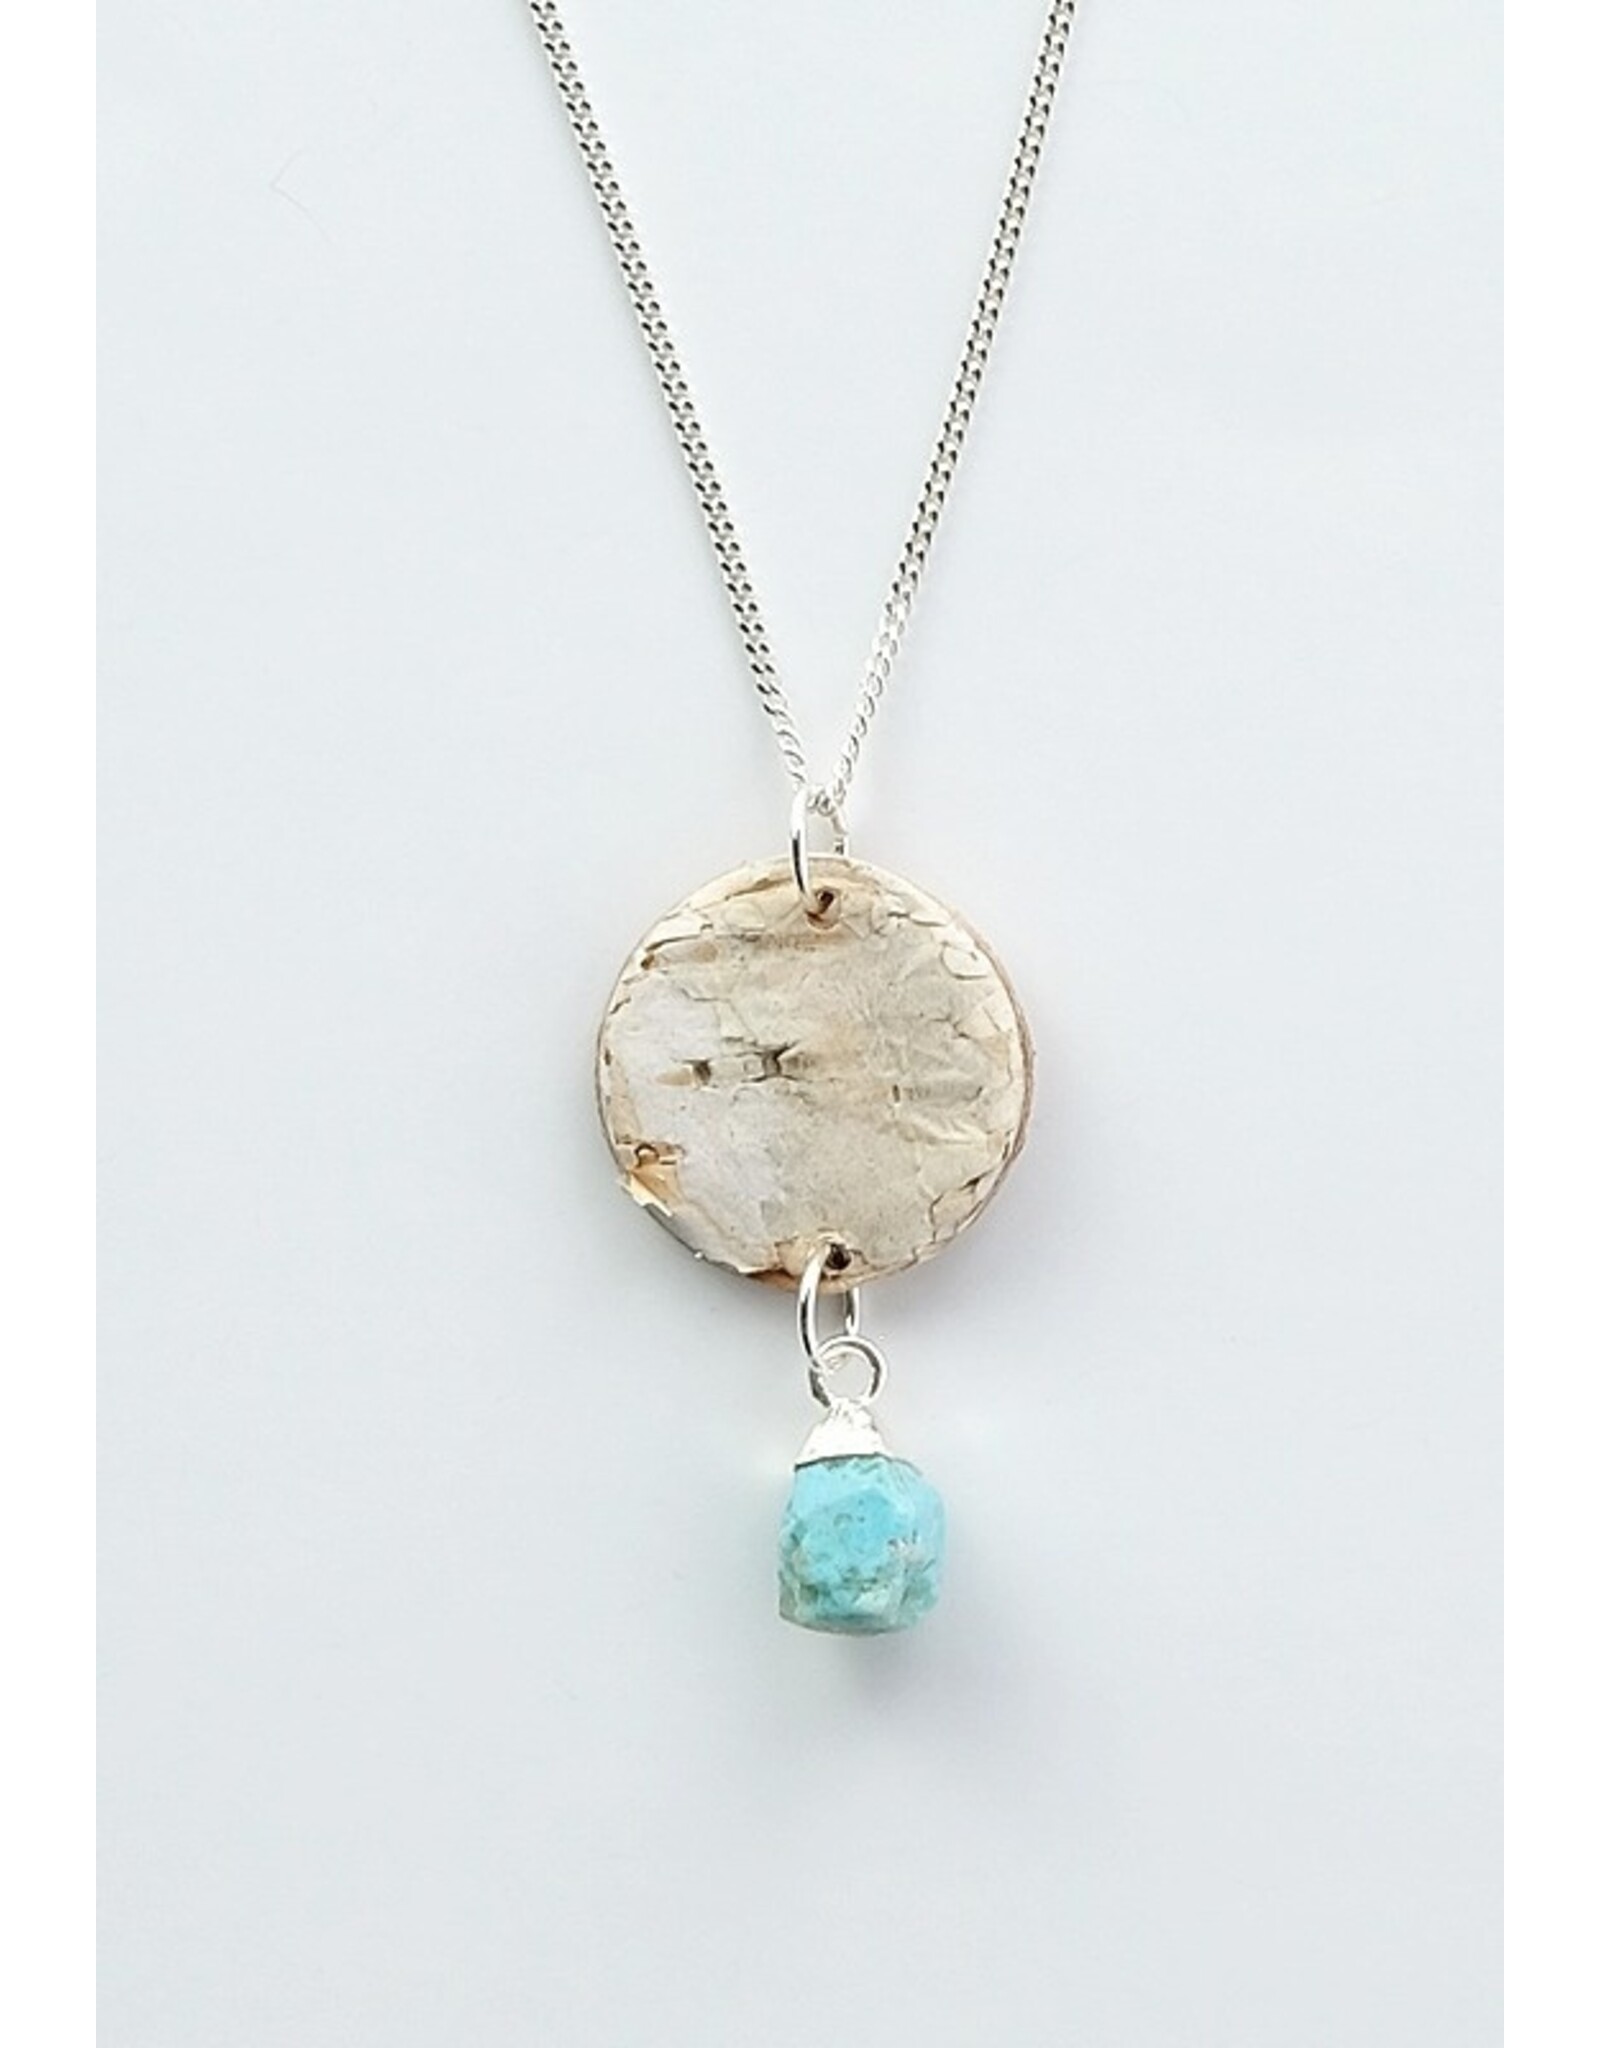 Silver Birch Bark Pendant with Turquoise - BBSS6-P